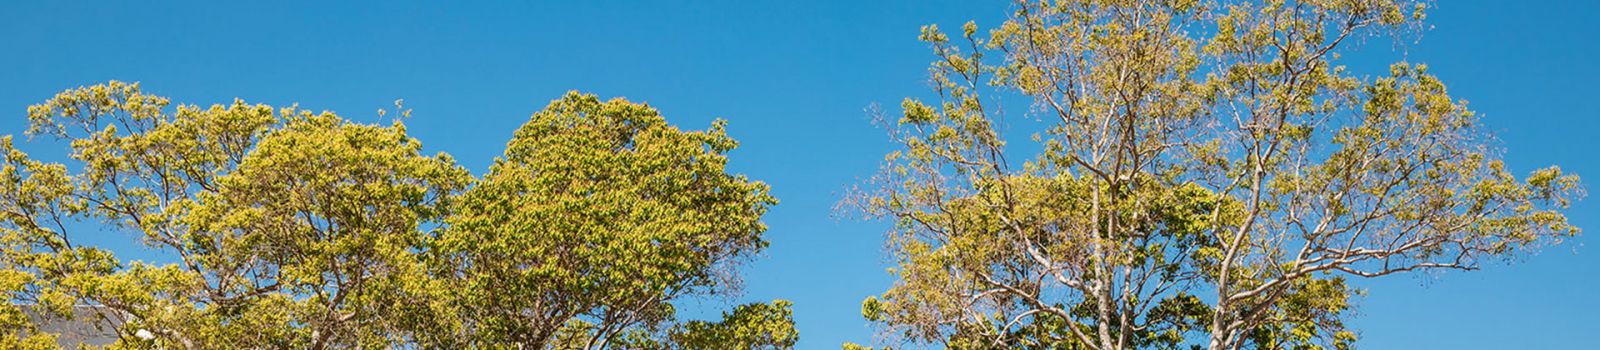 Image of green trees against a blue sky banner image